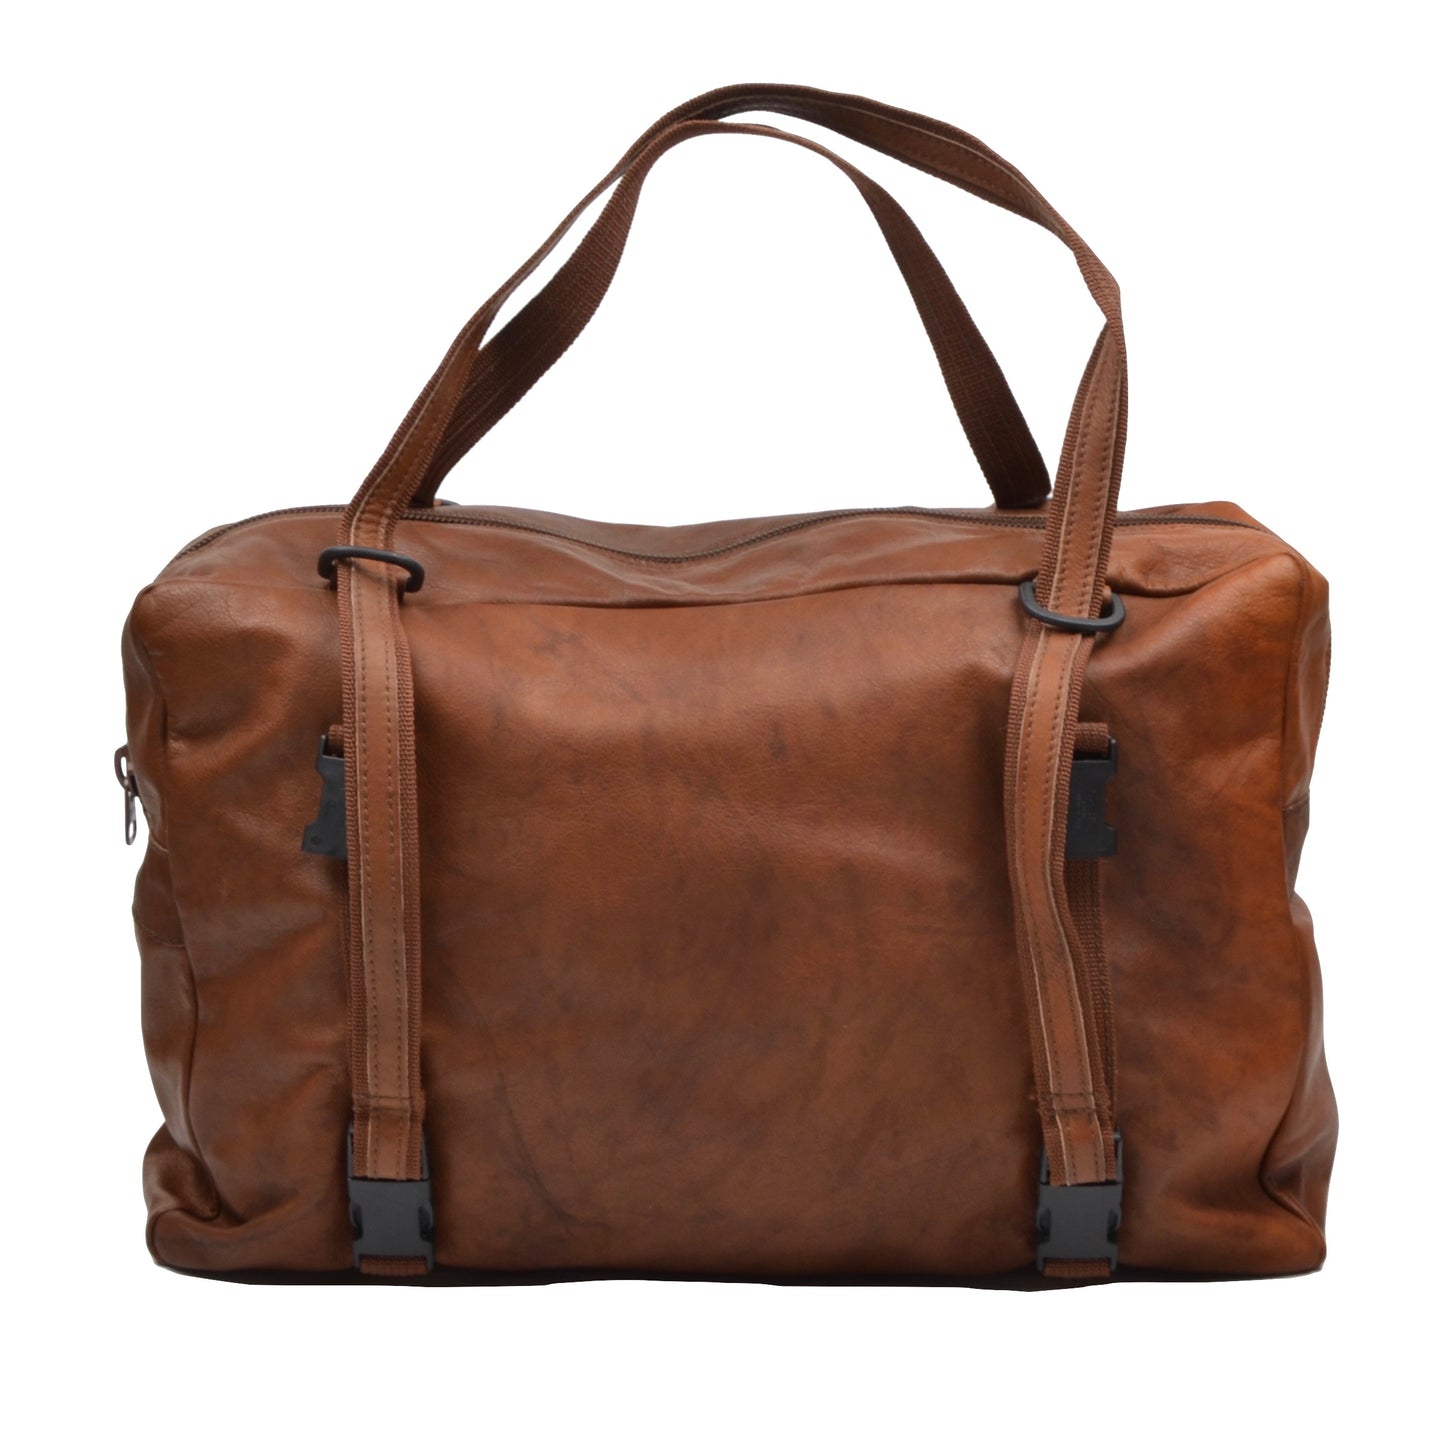 Jean Weipert Traveller Leather Gym/Duffle Bag - Brown